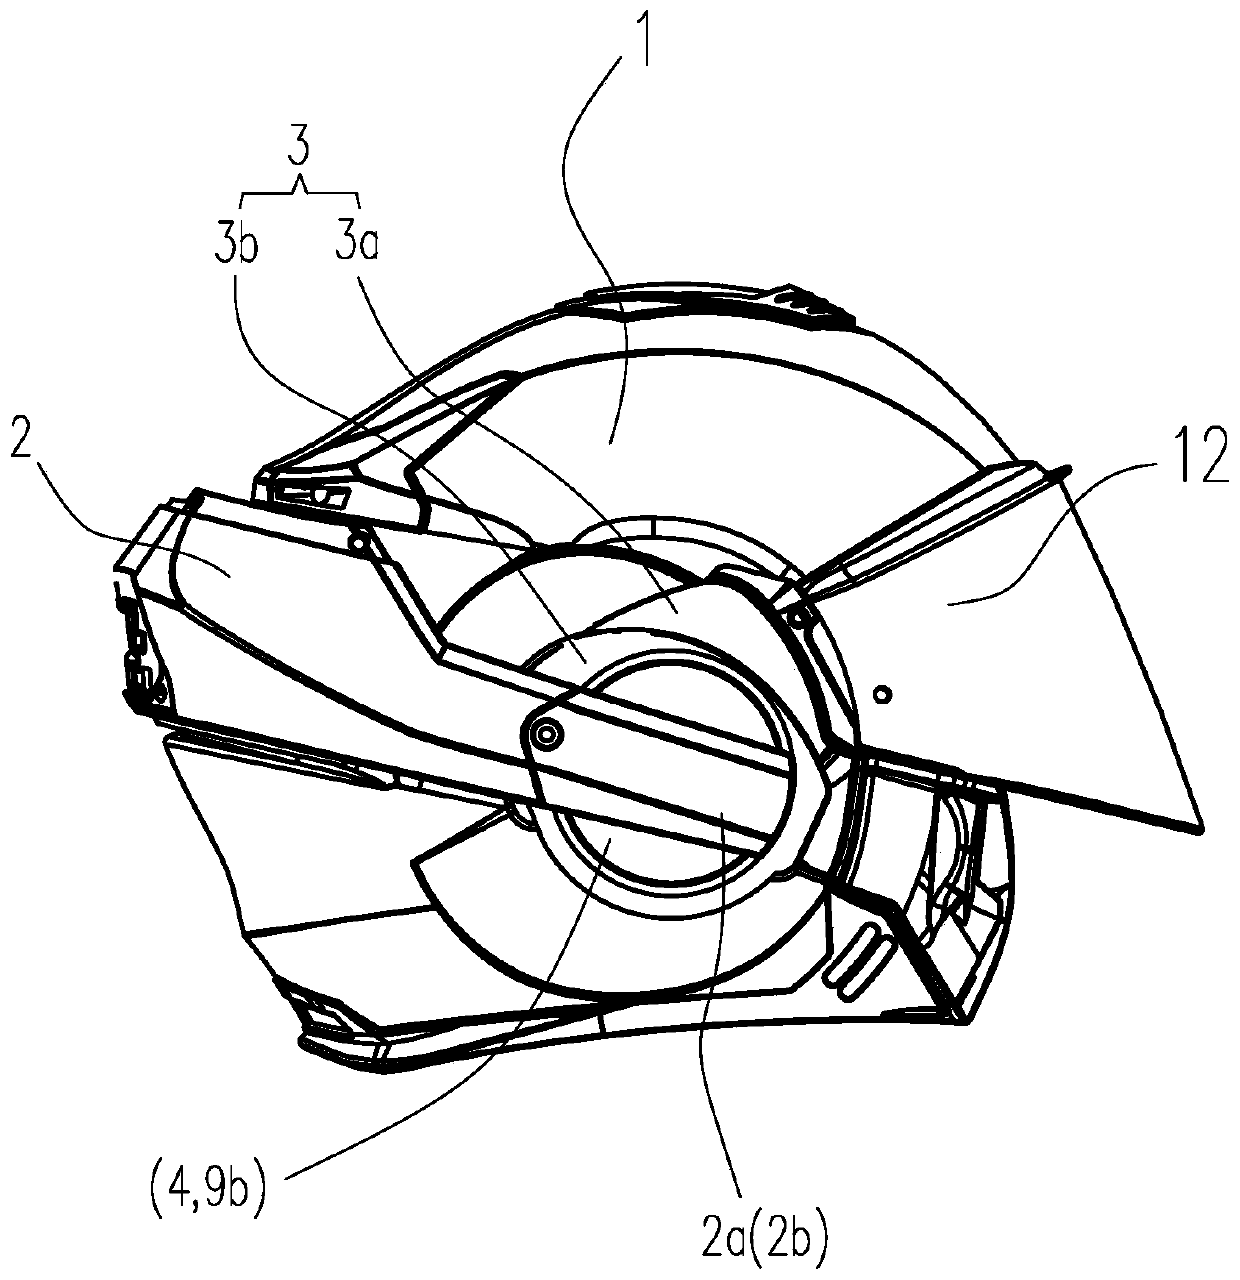 Gear-constrained transformable jaw-guard helmet